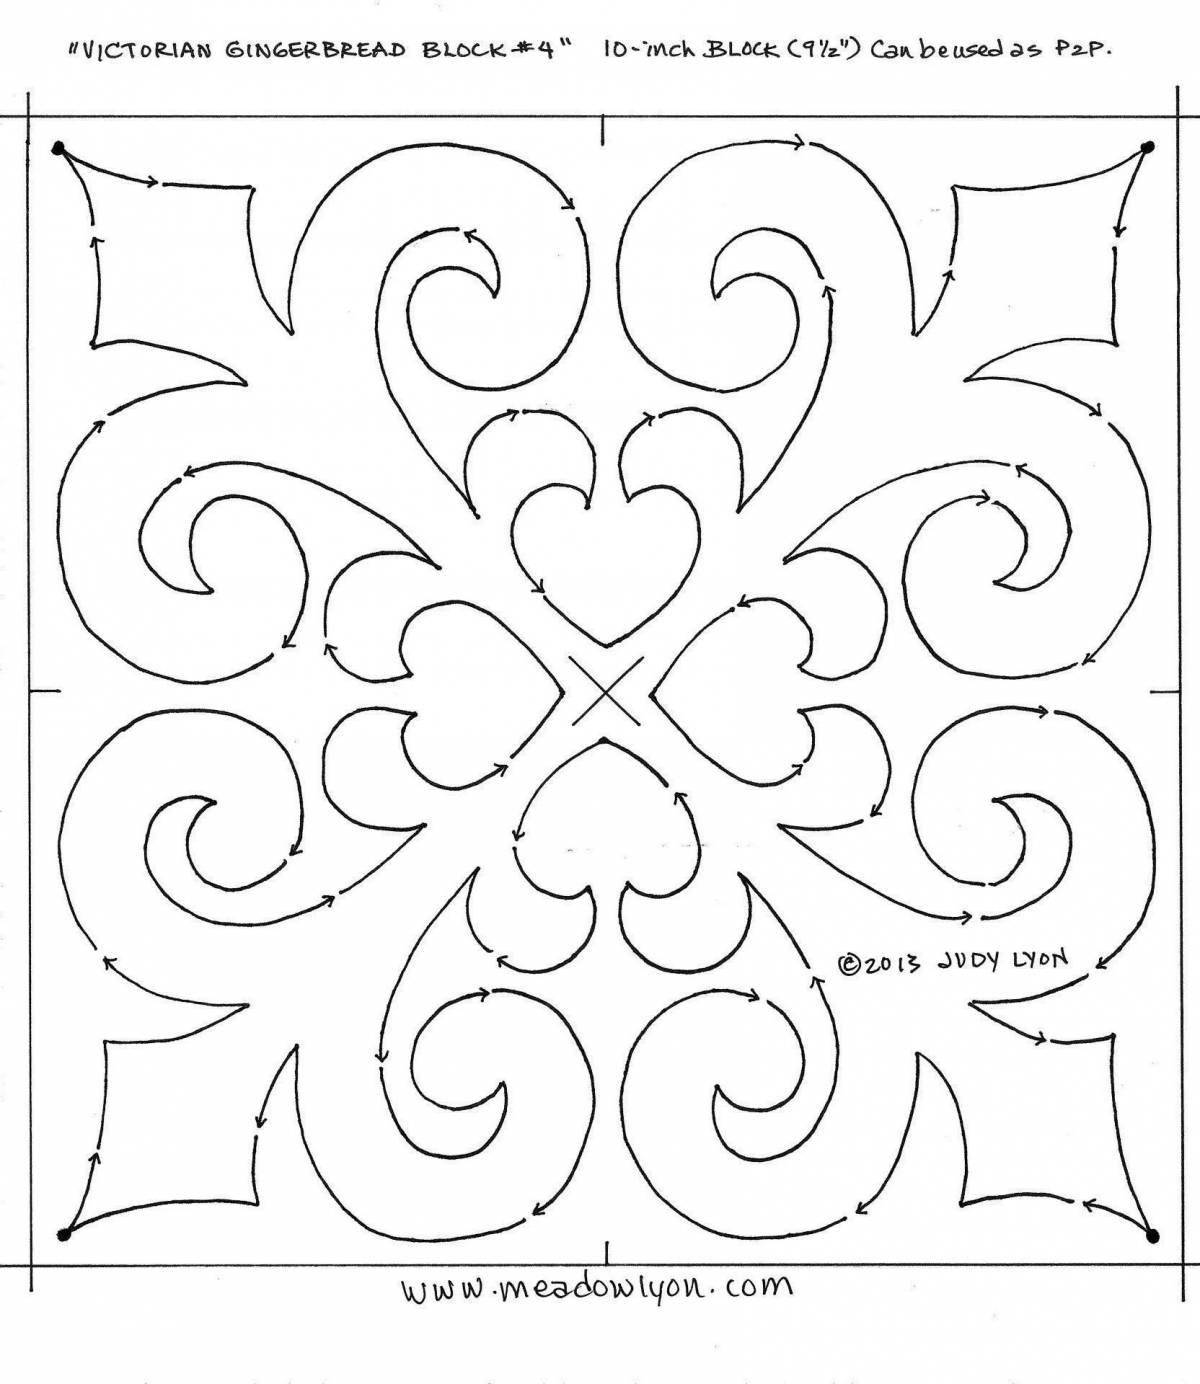 Lovely oy coloring pages for kids